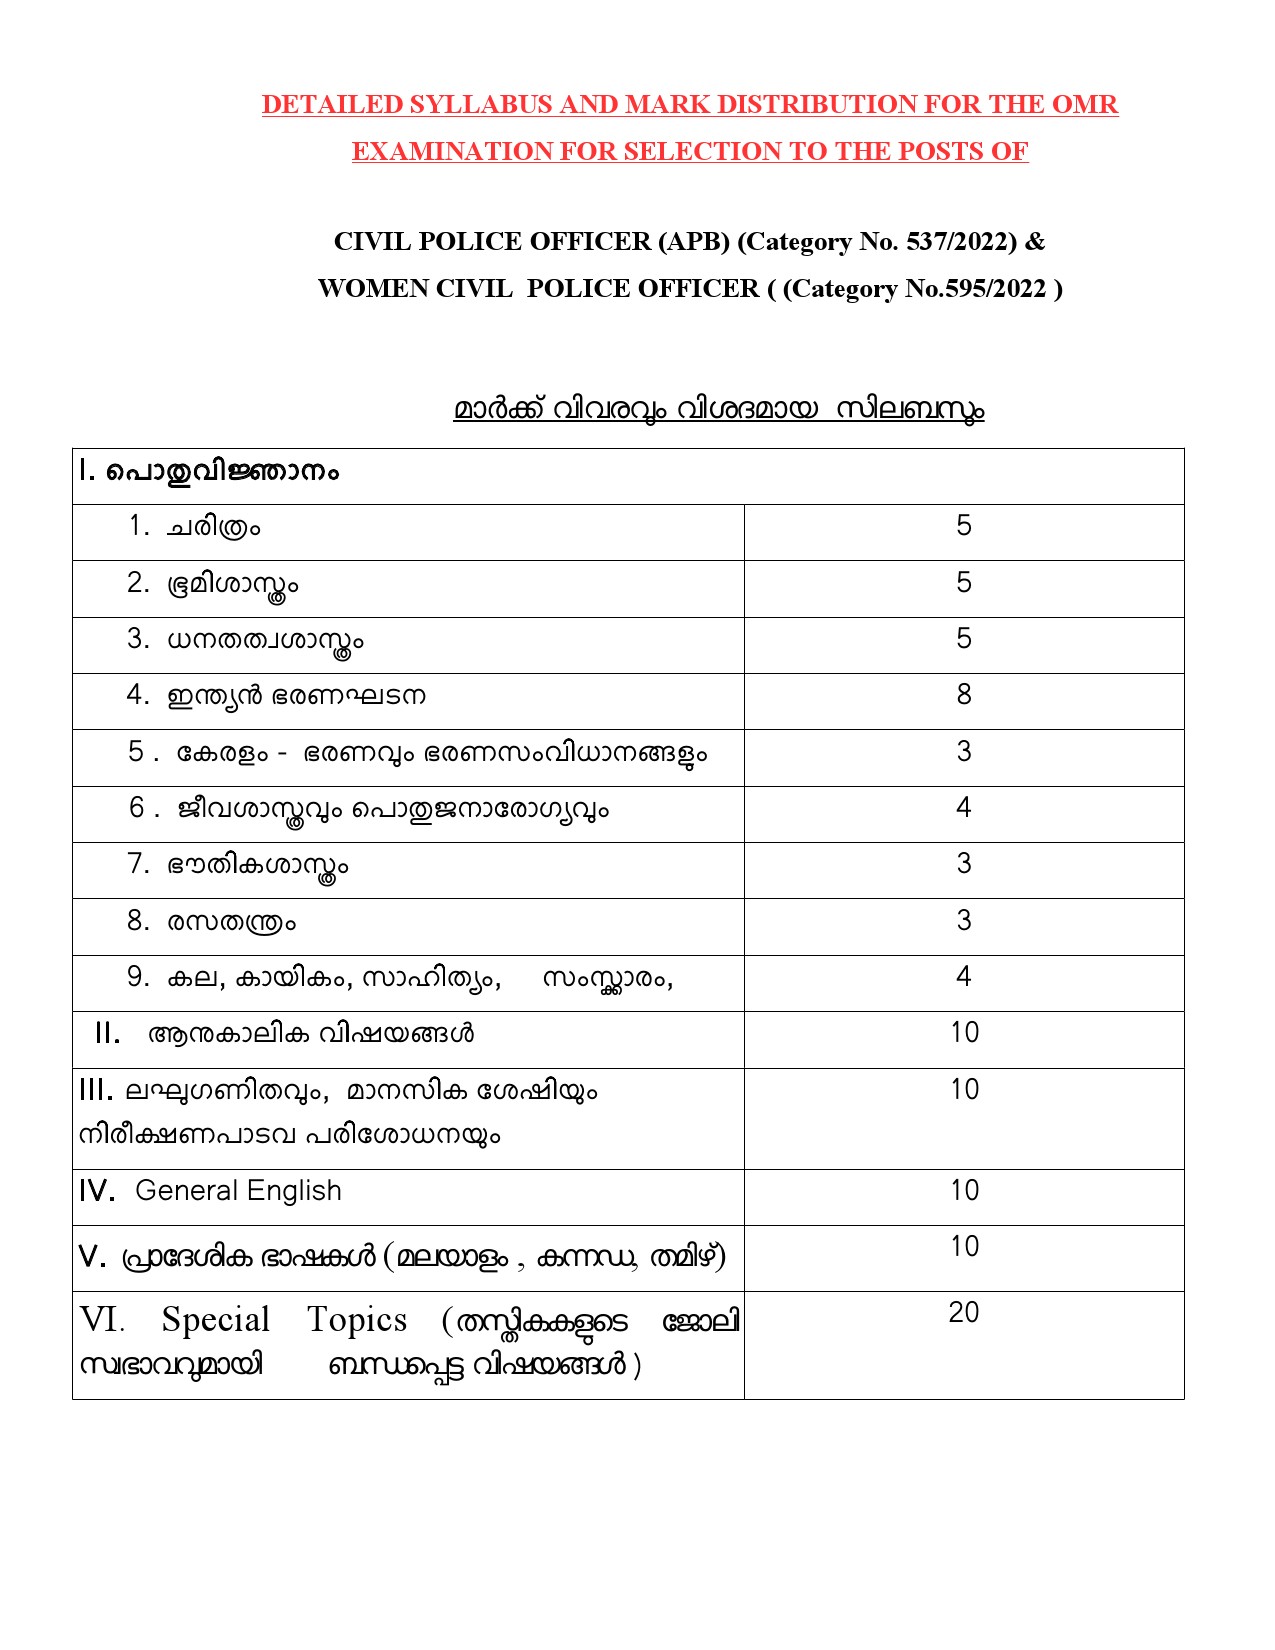 Syllabus For 2023 OMR Examination Of Civil Police Officer - Notification Image 1